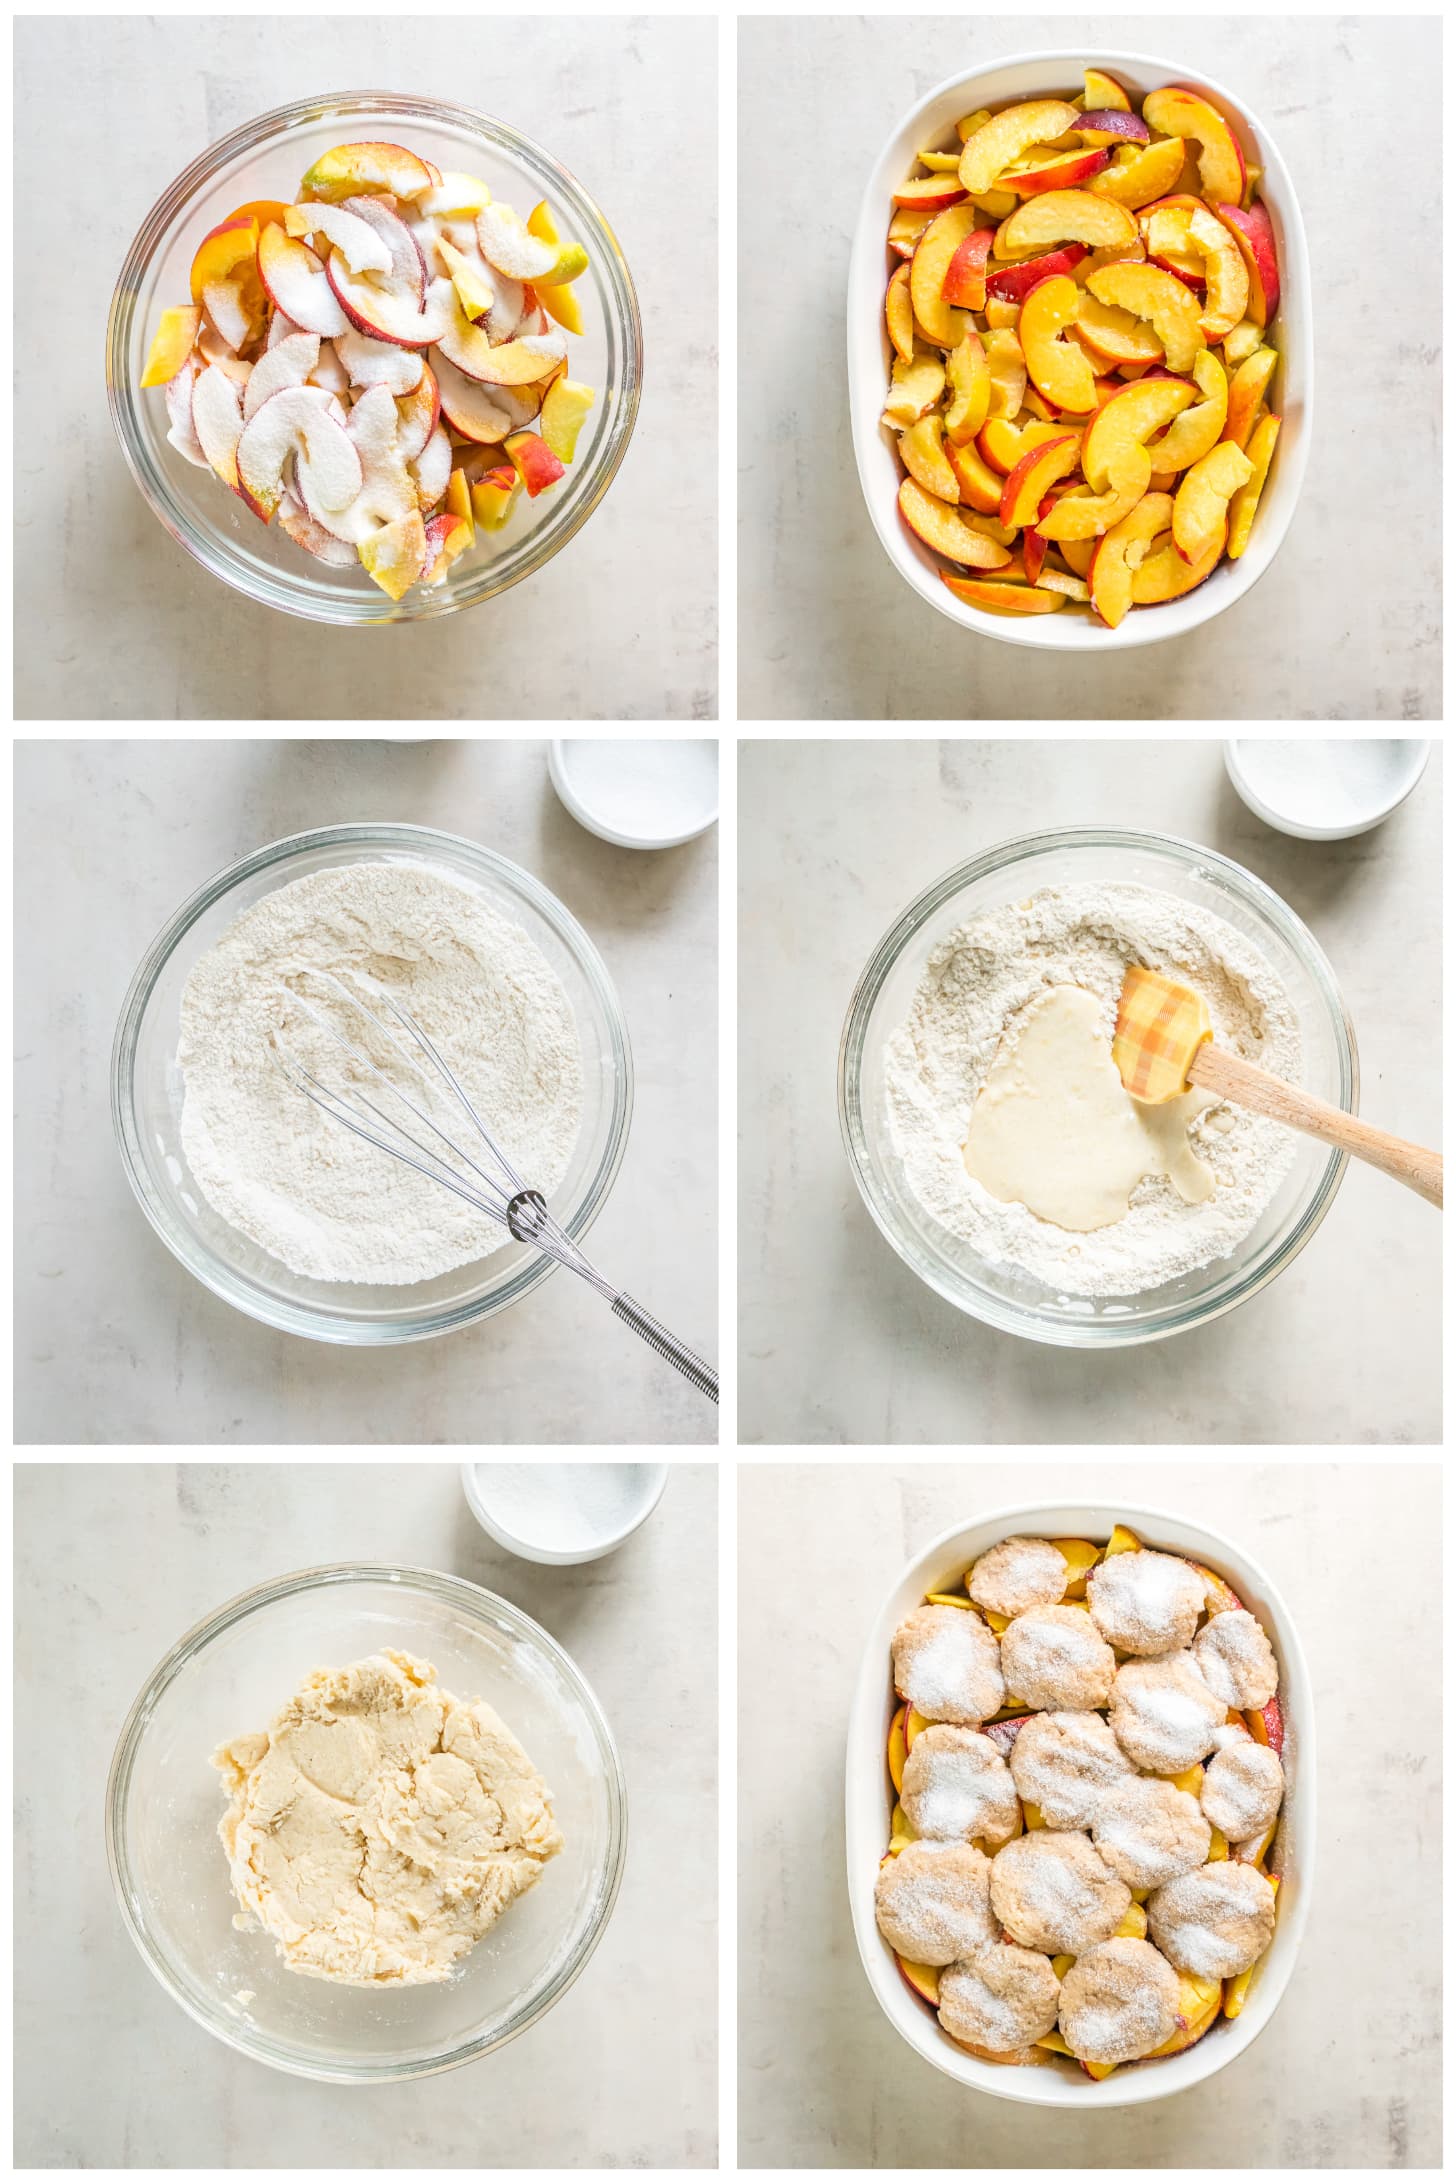 photo collage demonstrating how to make peach cobbler in a casserole dish